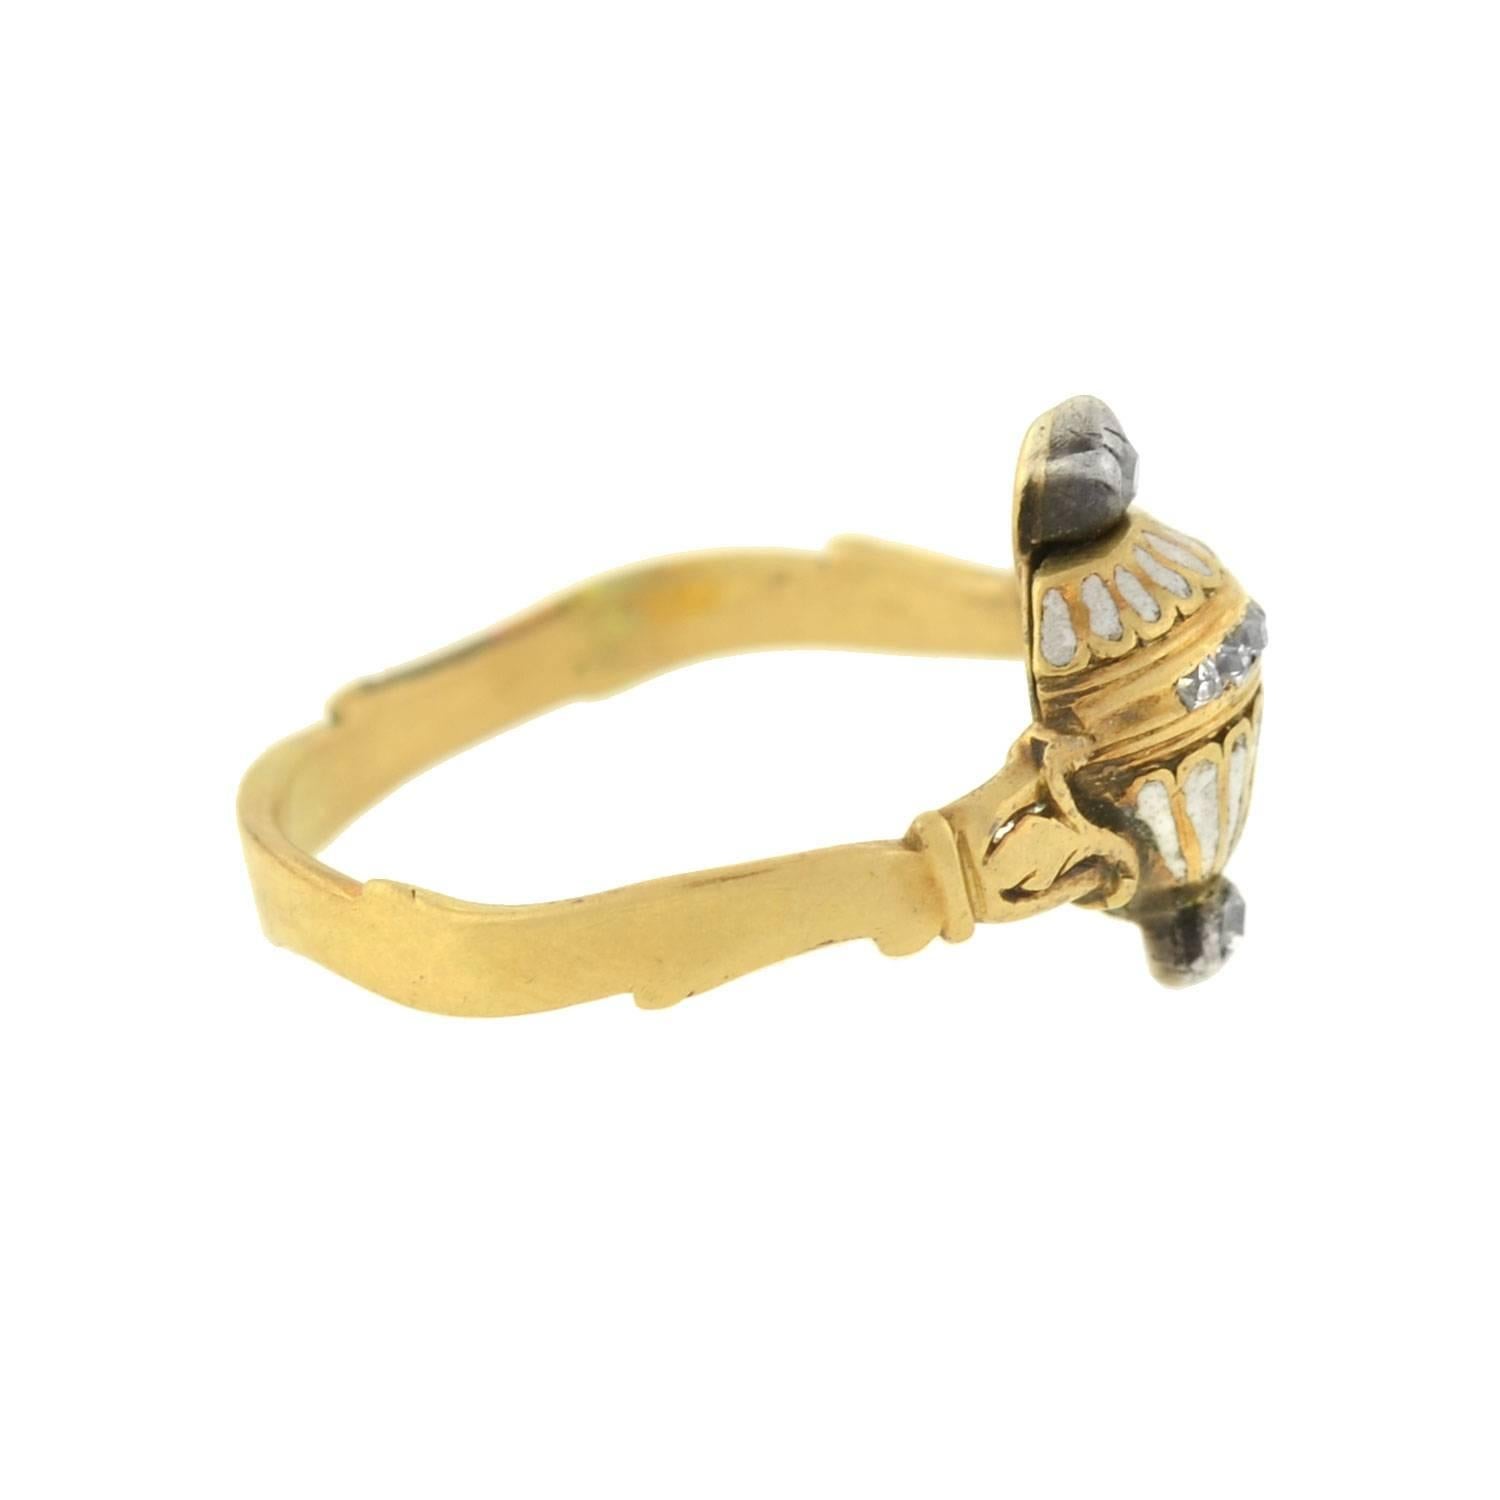 This rare memorial urn ring from the Georgian era (ca1750) is quite an unusual piece! Crafted in 18kt gold, the ring is richly detailed, and serves as a fine example of the mourning jewelry tradition. Framed between the gold band is a delicate